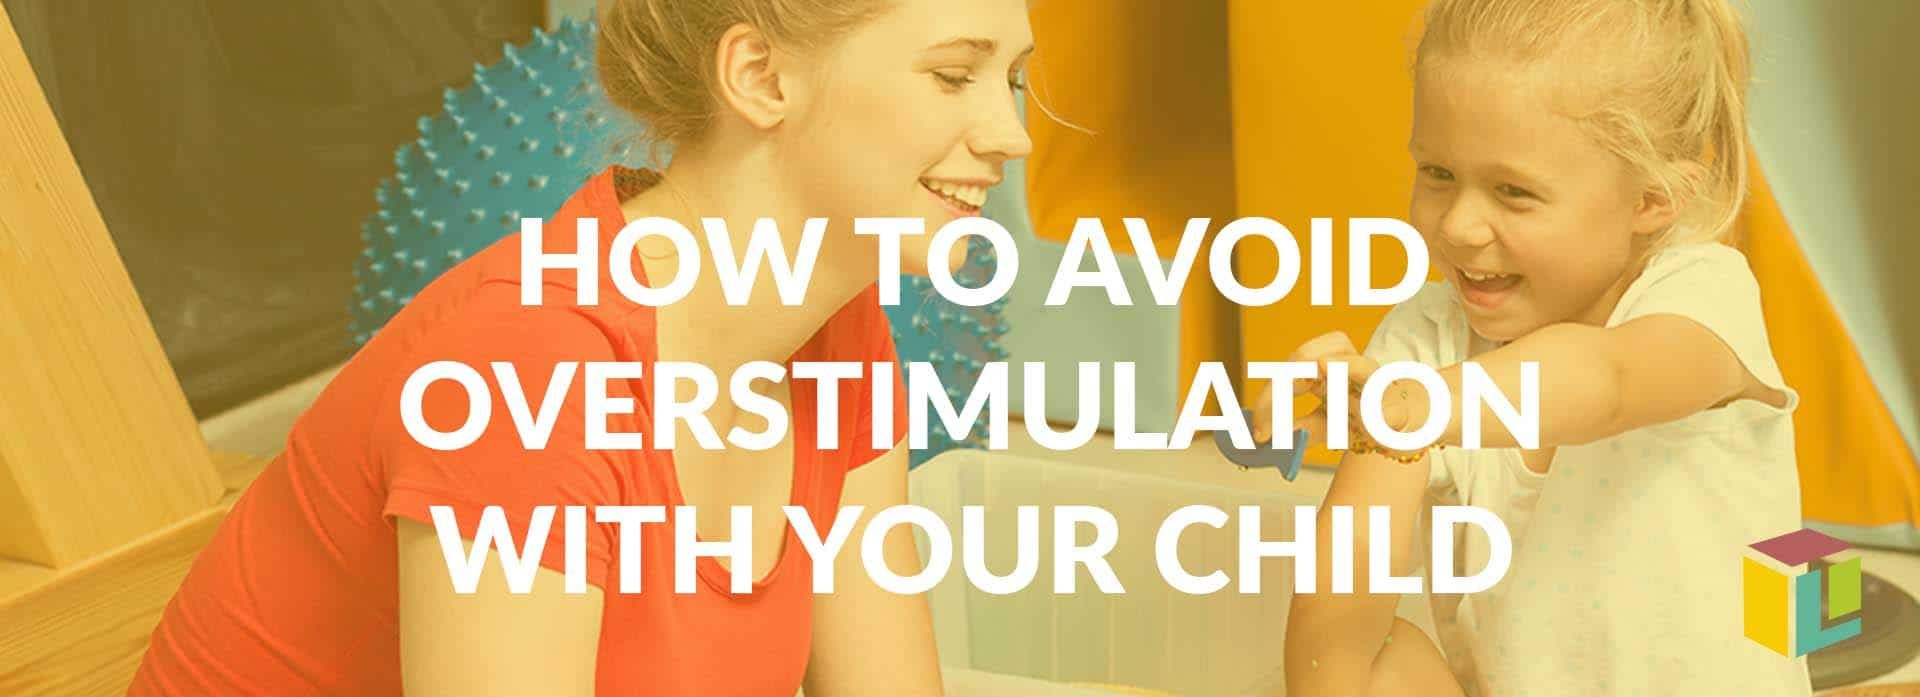 How To Avoid Overstimulation With Your Child How To Avoid Overstimulation With Your Child How To Avoid Overstimulation With Your Child How To Avoid Overstimulation With Your Child